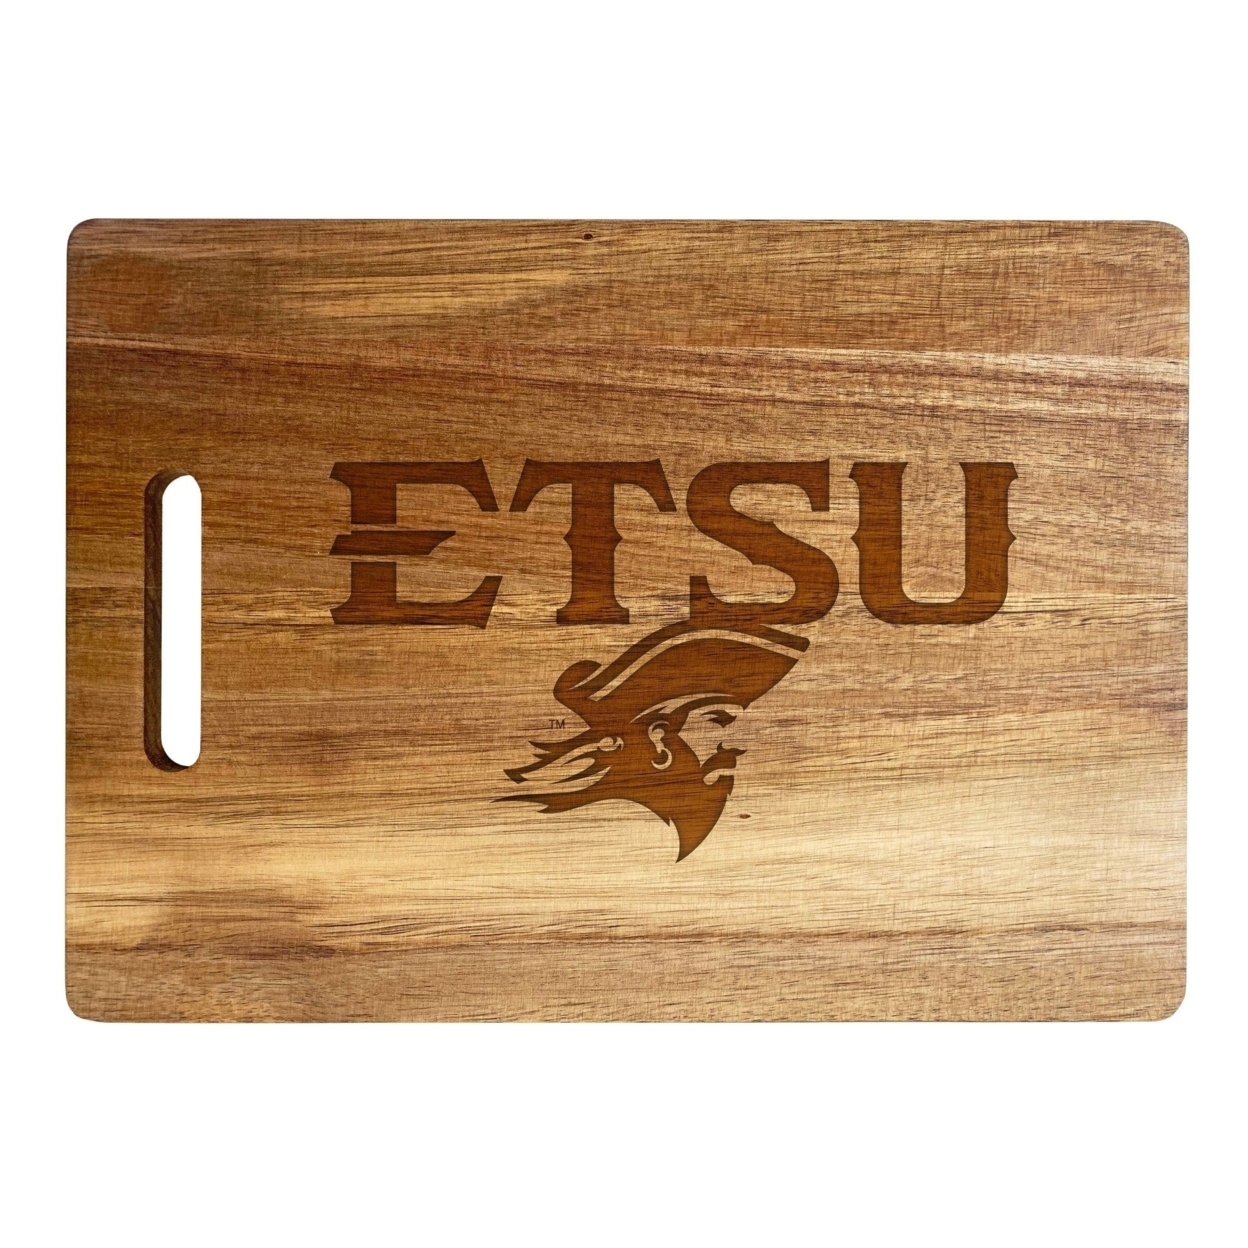 East Tennessee State University Engraved Wooden Cutting Board 10 X 14 Acacia Wood - Large Engraving